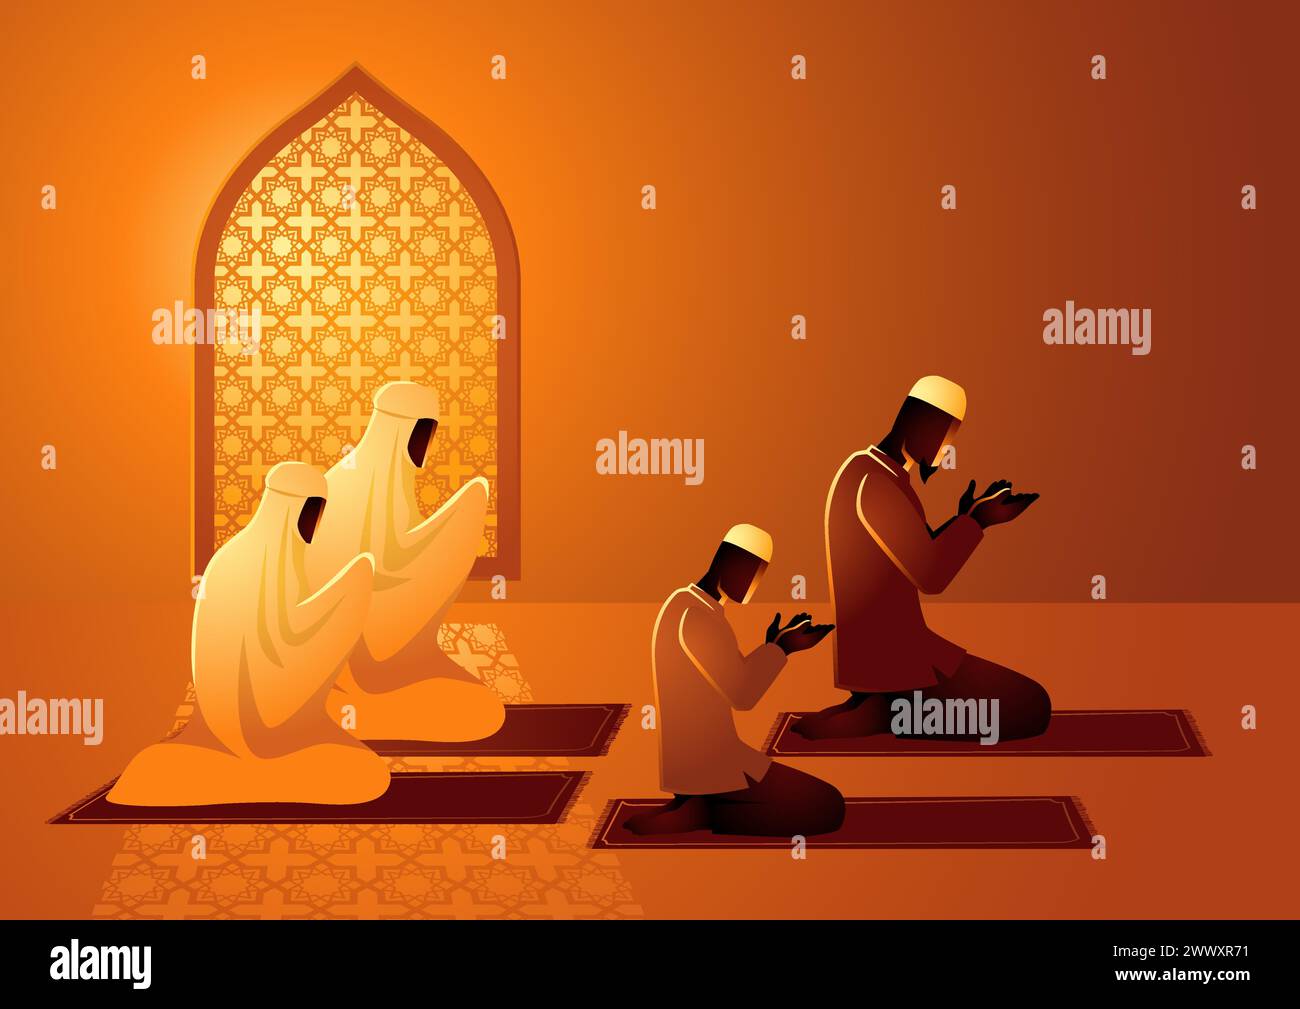 Vector illustration of muslim family praying together Stock Vector